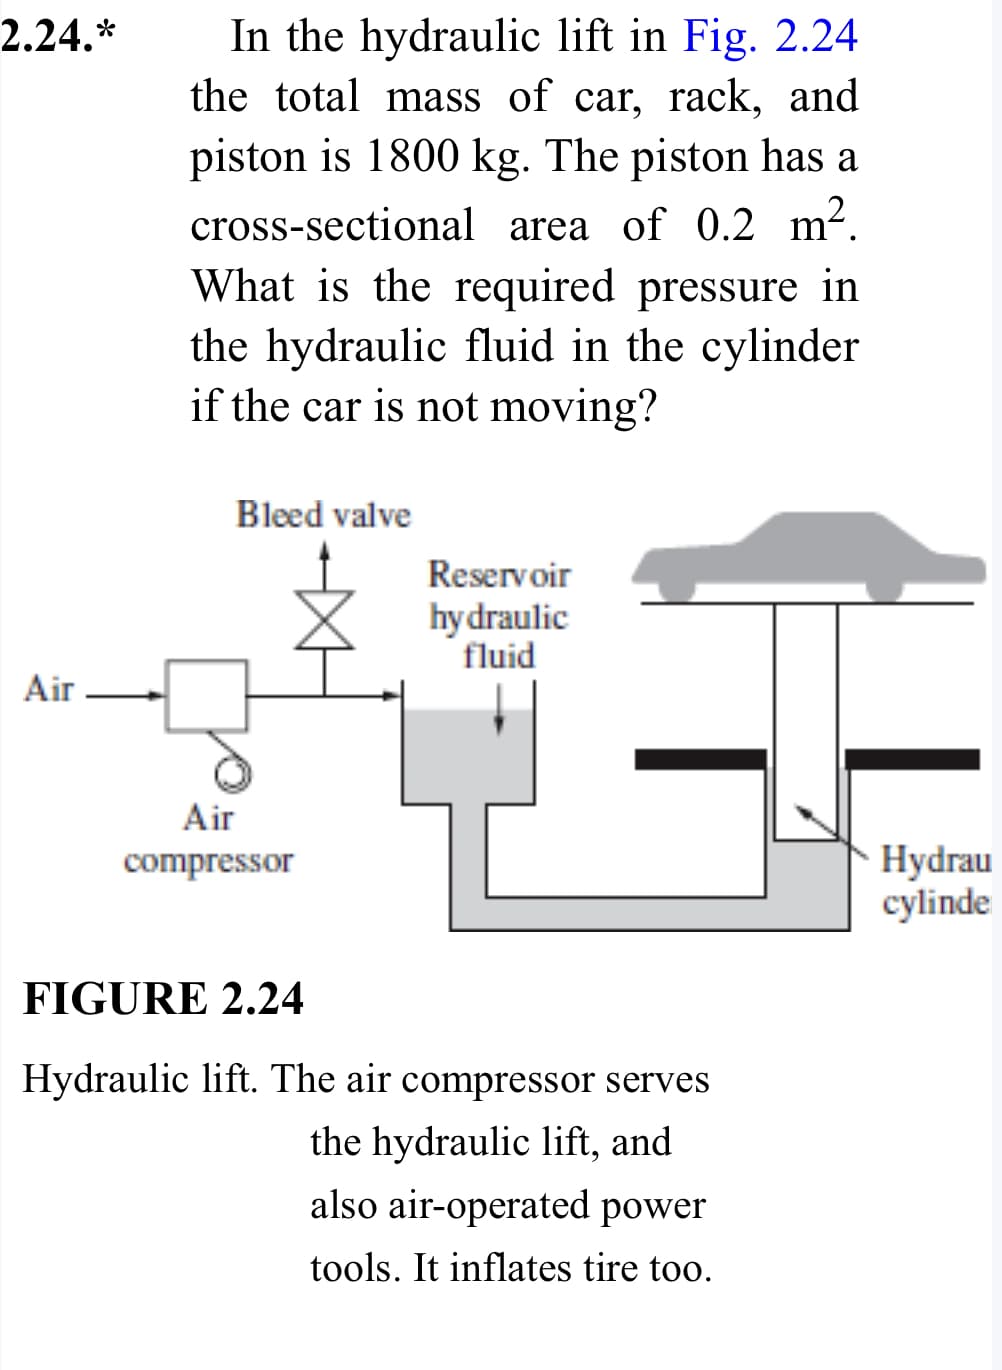 2.24.*
Air
In the hydraulic lift in Fig. 2.24
the total mass of car, rack, and
piston is 1800 kg. The piston has a
cross-sectional area of 0.2 m².
What is the required pressure in
the hydraulic fluid in the cylinder
if the car is not moving?
Bleed valve
Air
compressor
Reservoir
hydraulic
fluid
FIGURE 2.24
Hydraulic lift. The air compressor serves
the hydraulic lift, and
also air-operated power
tools. It inflates tire too.
Hydrau
cylinde